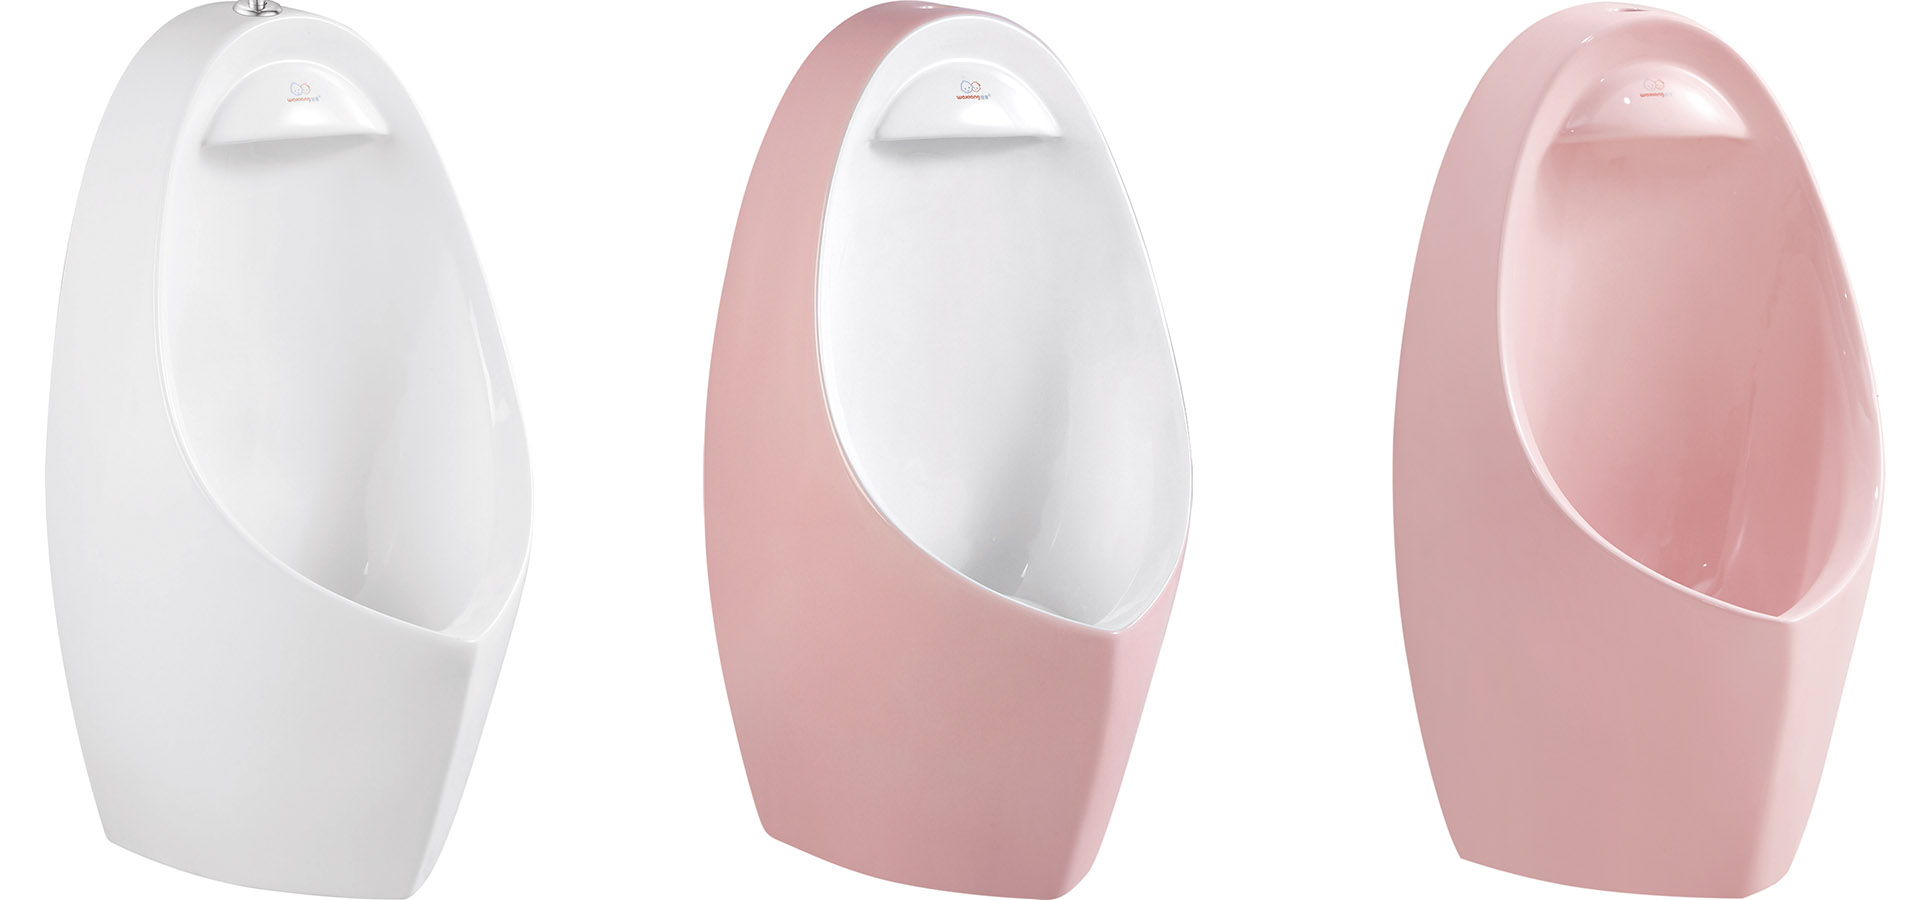 pink and white color children size floor mounted urinal, best urinal for kindergarten and preschool